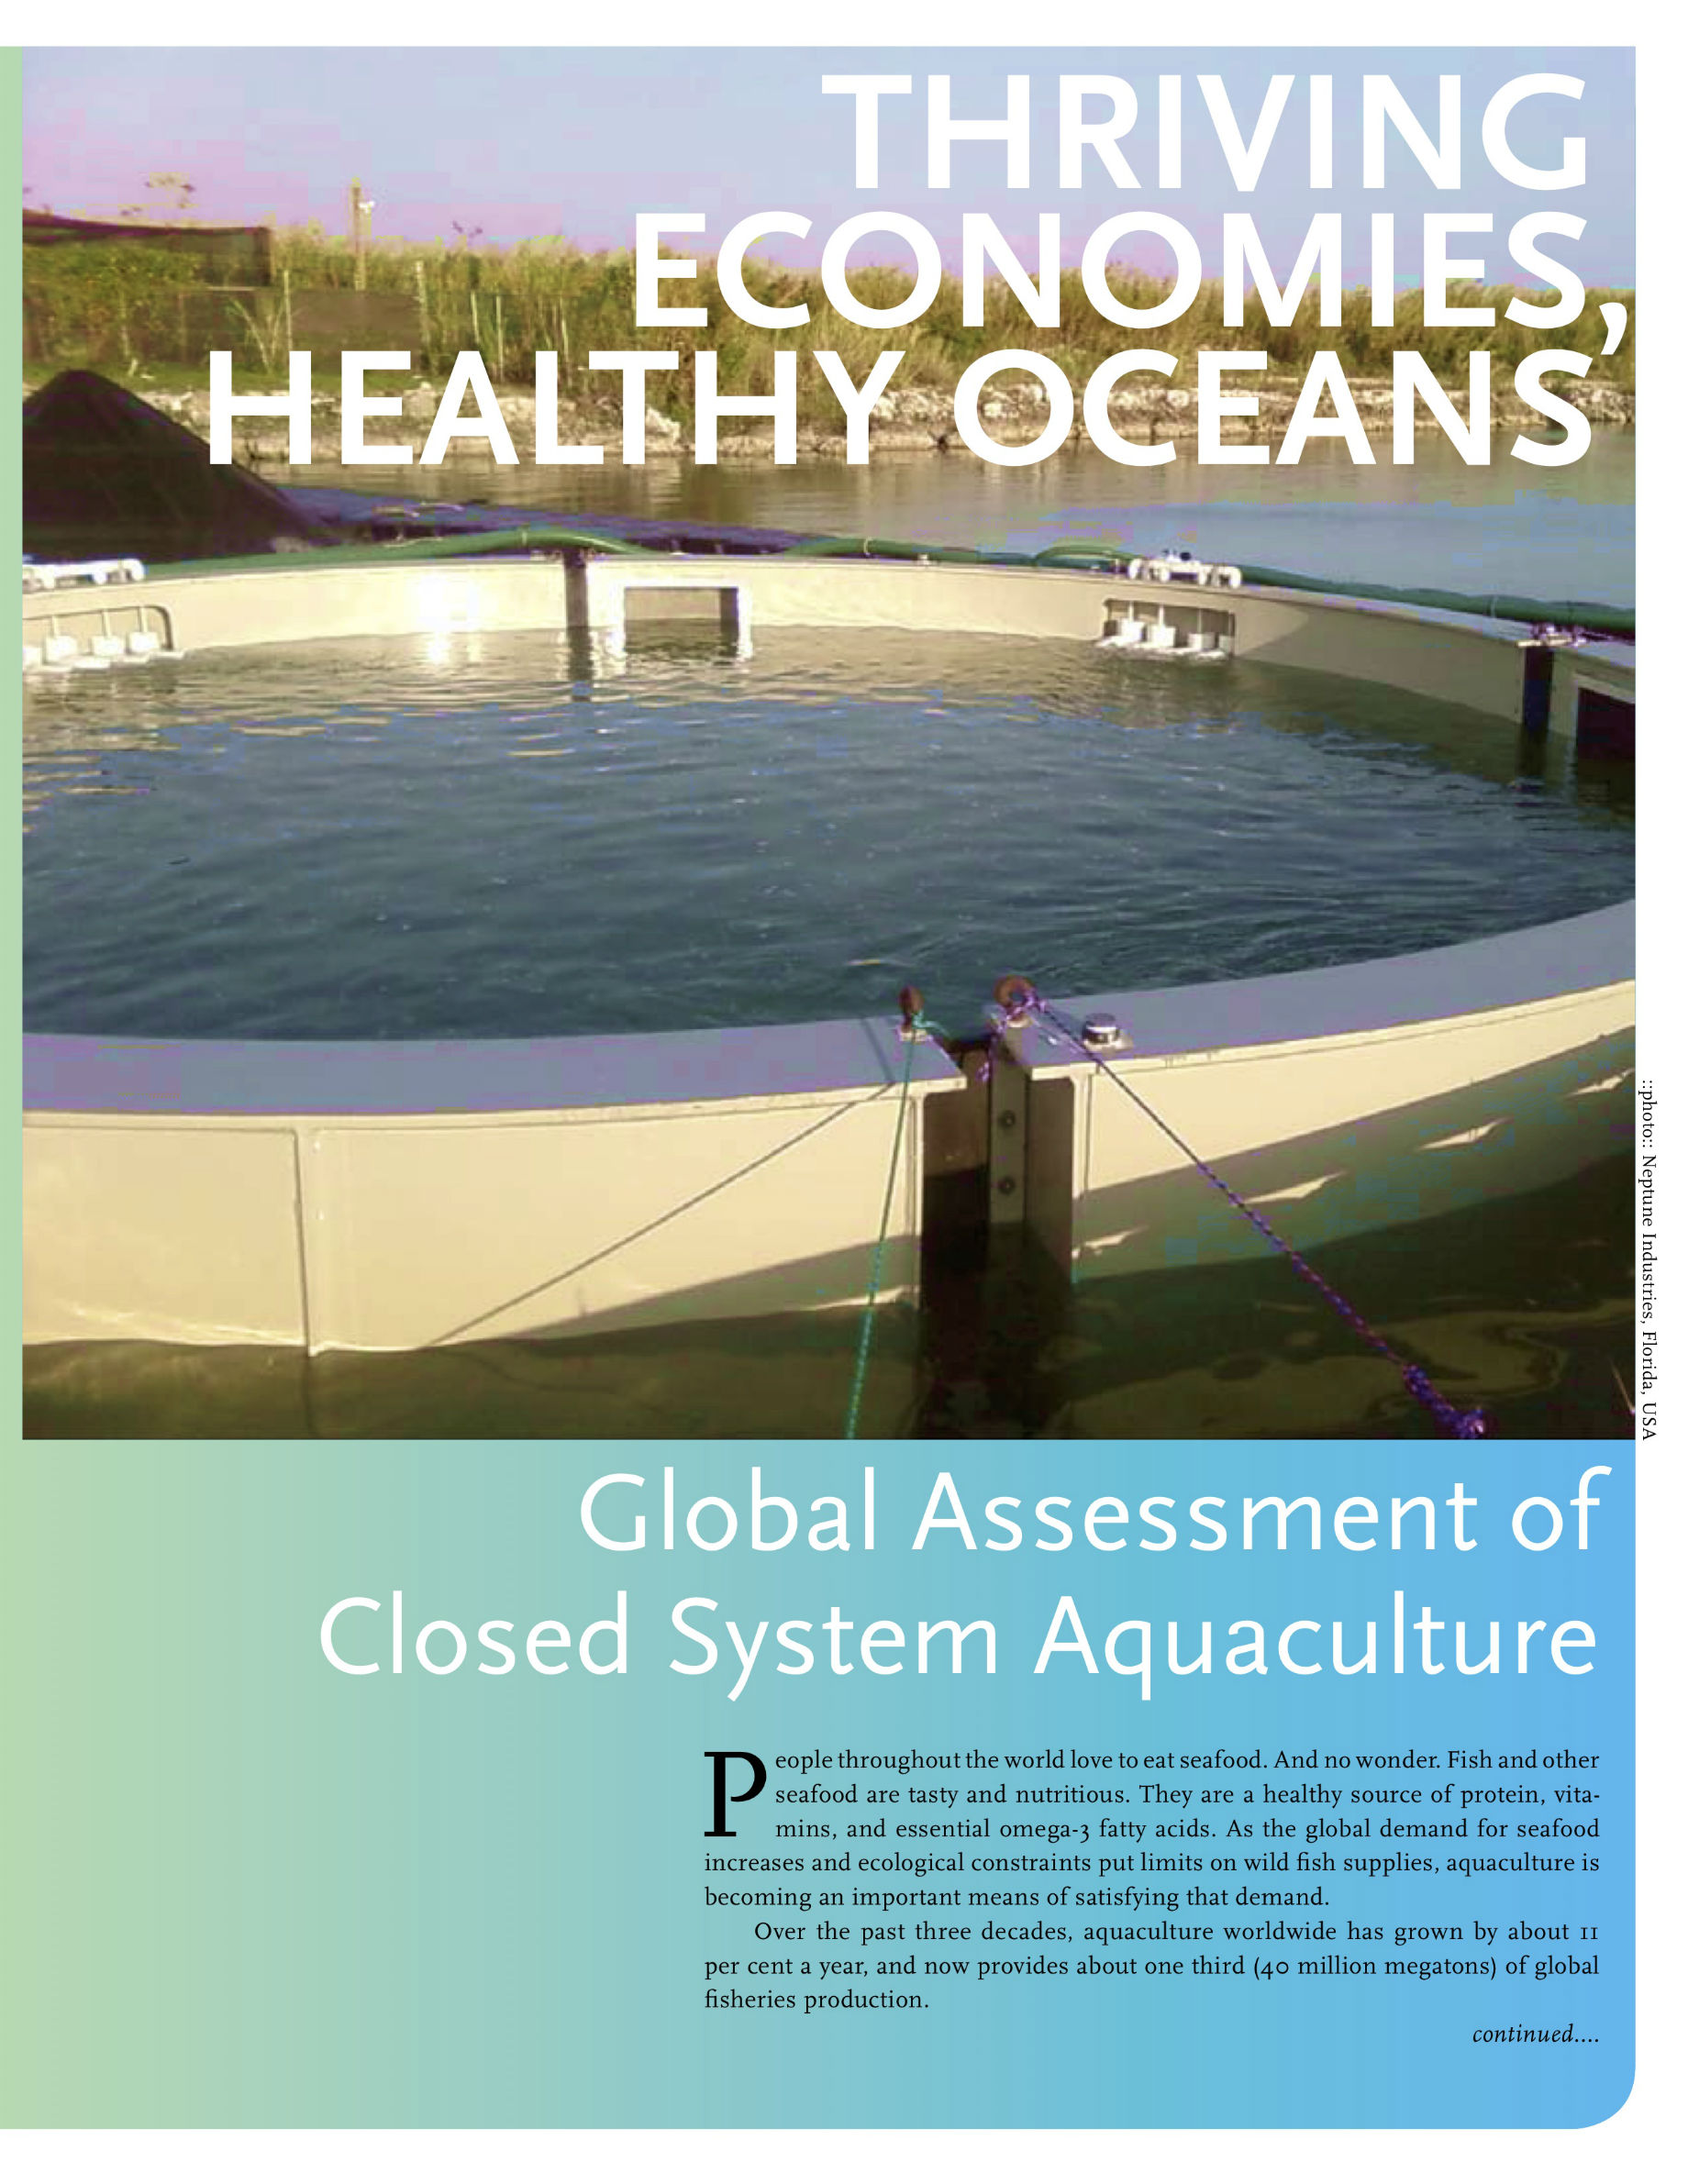 EXECUTIVE SUMMARY: Thriving Economies, Healthy Oceans: Global Assessment of Closed System Aquaculture